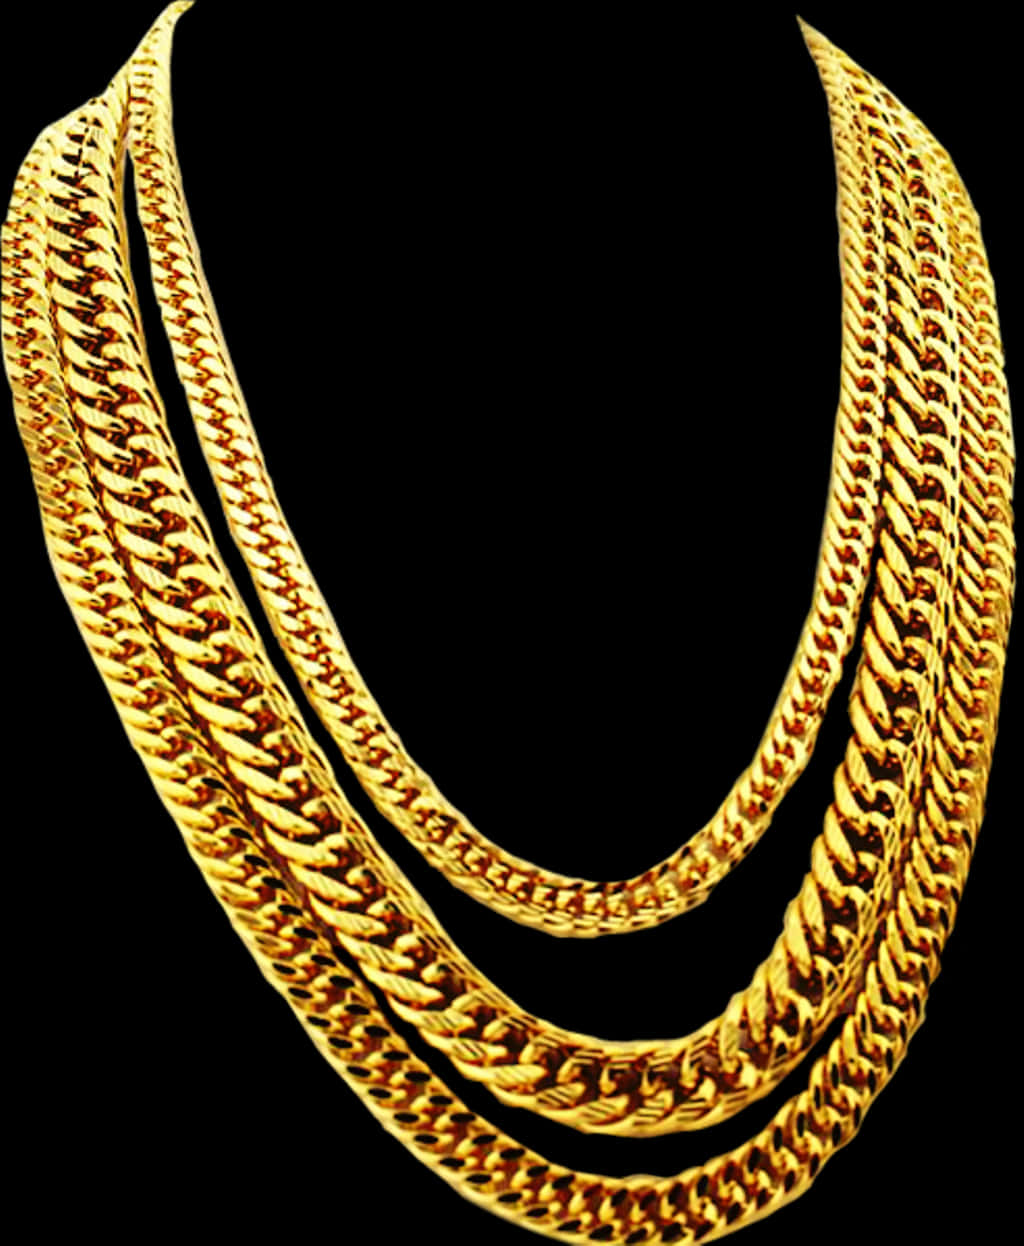 A Close Up Of A Necklace